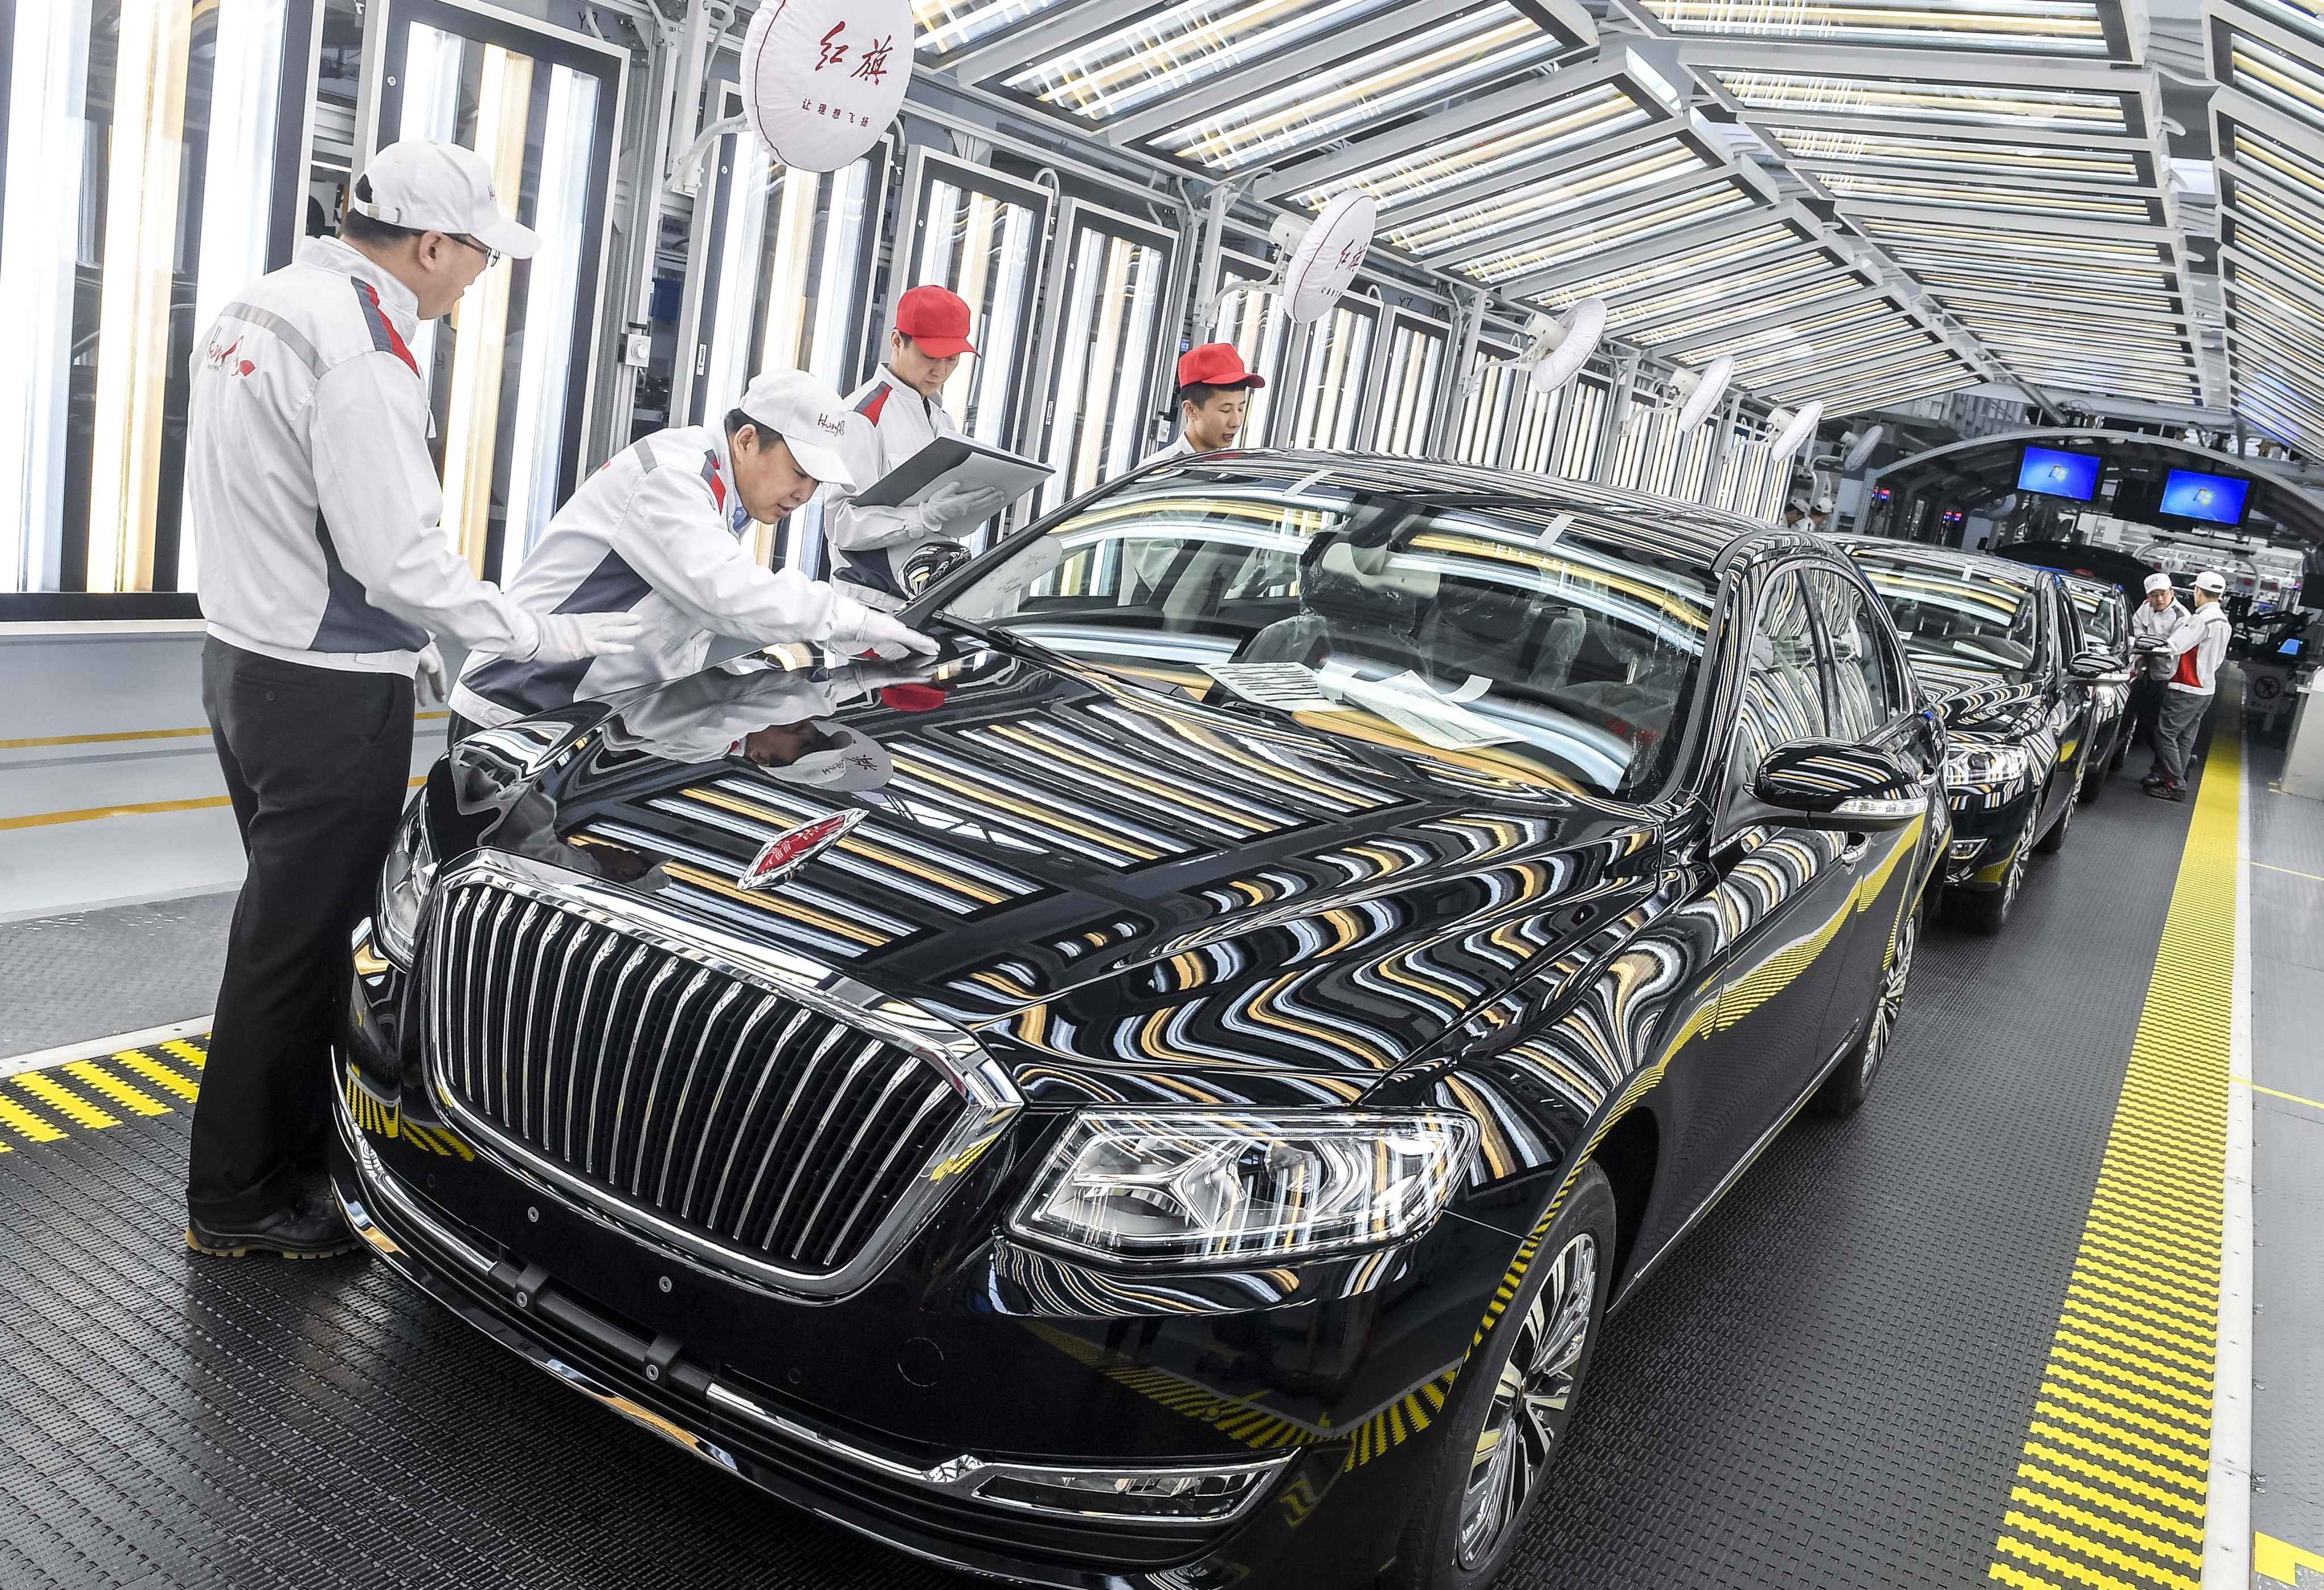 FAW’s Red Flag limousines are inspected at its assembly line in Changchun, in this file photo from April 2019. Photo: Xinhua